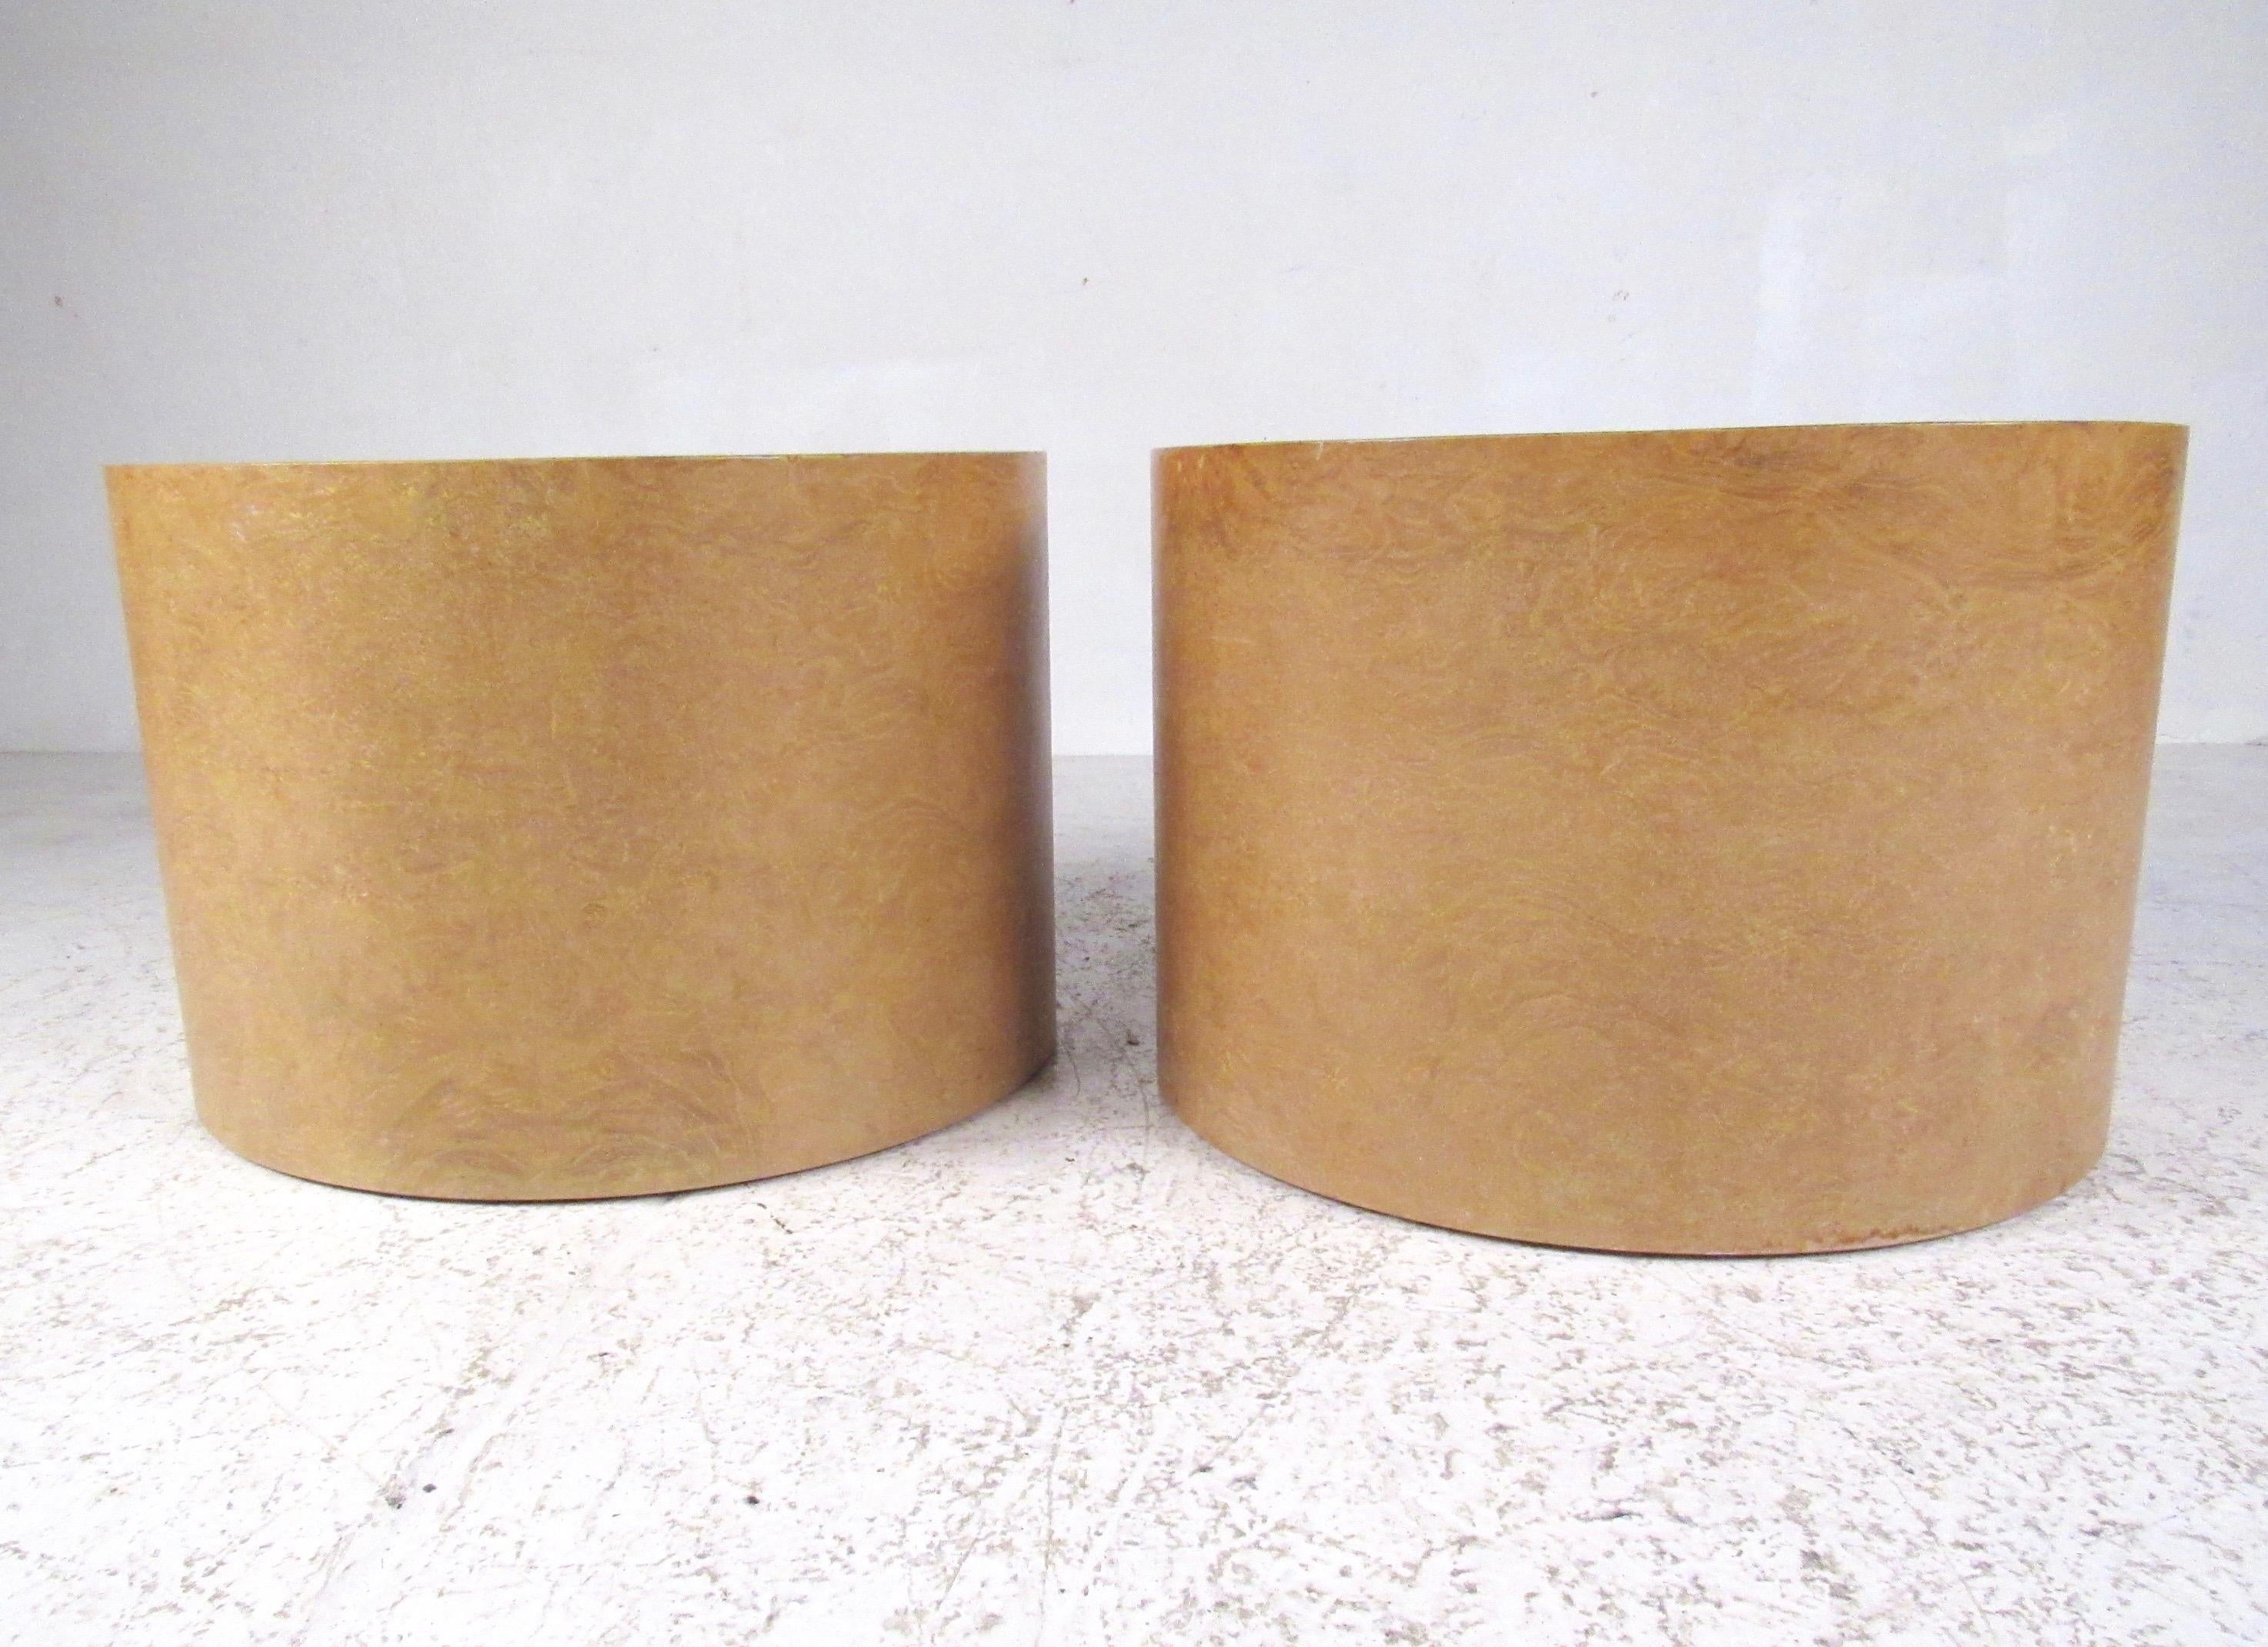 This stylish pair of vintage modern end tables feature a maple burl finish and cylindrical design of Intrex furniture. The unique style of the pair make them an elegant addition to home or business setting as end tables or pedestals. Please confirm